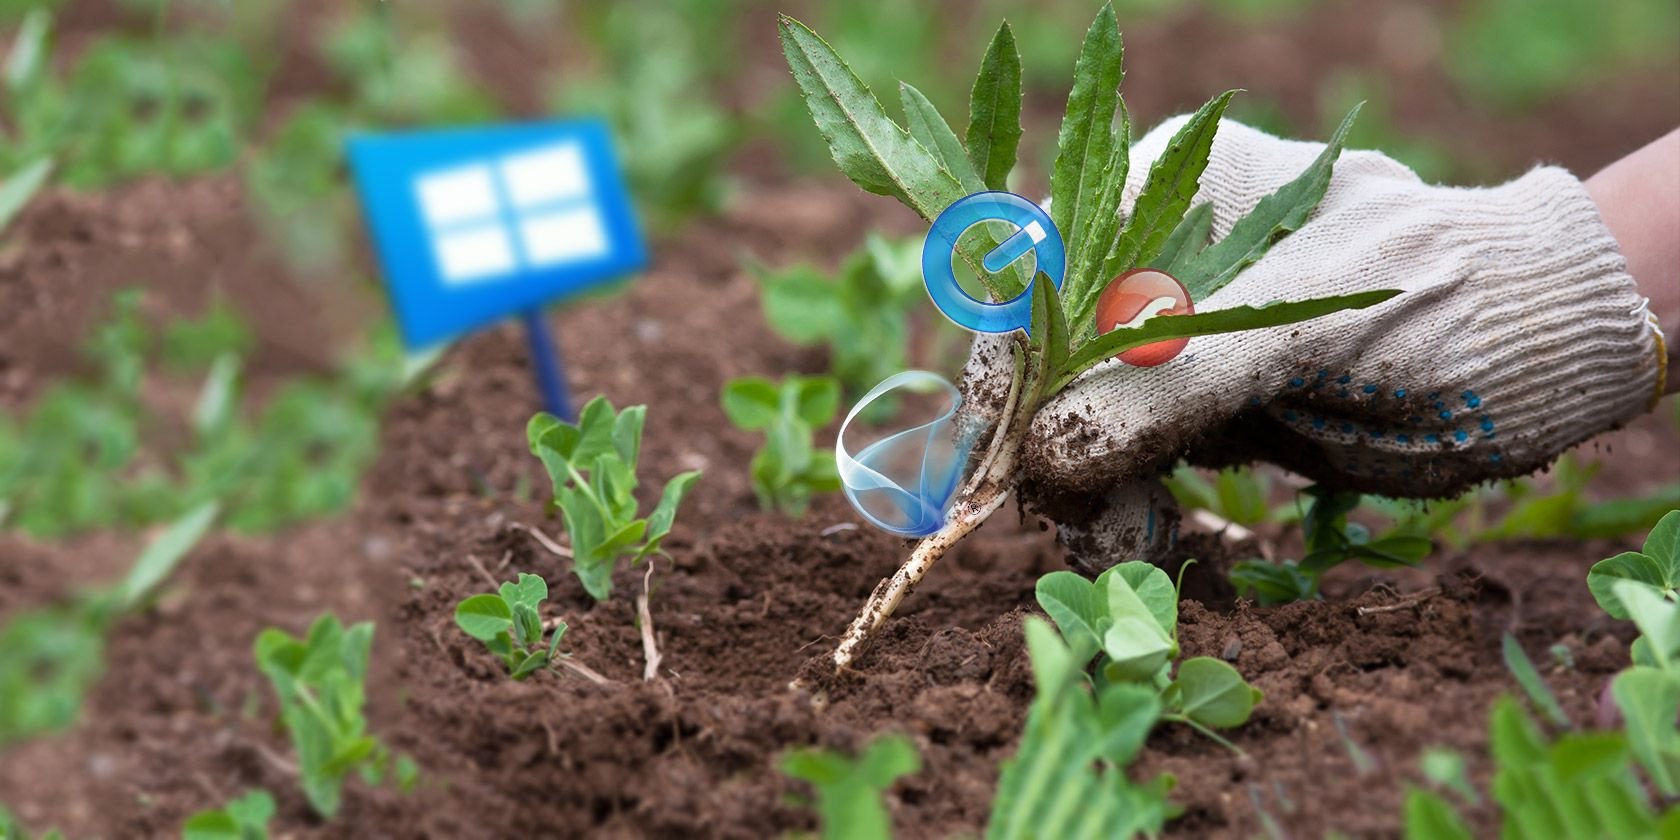 12 Windows Apps You Should Uninstall NOW